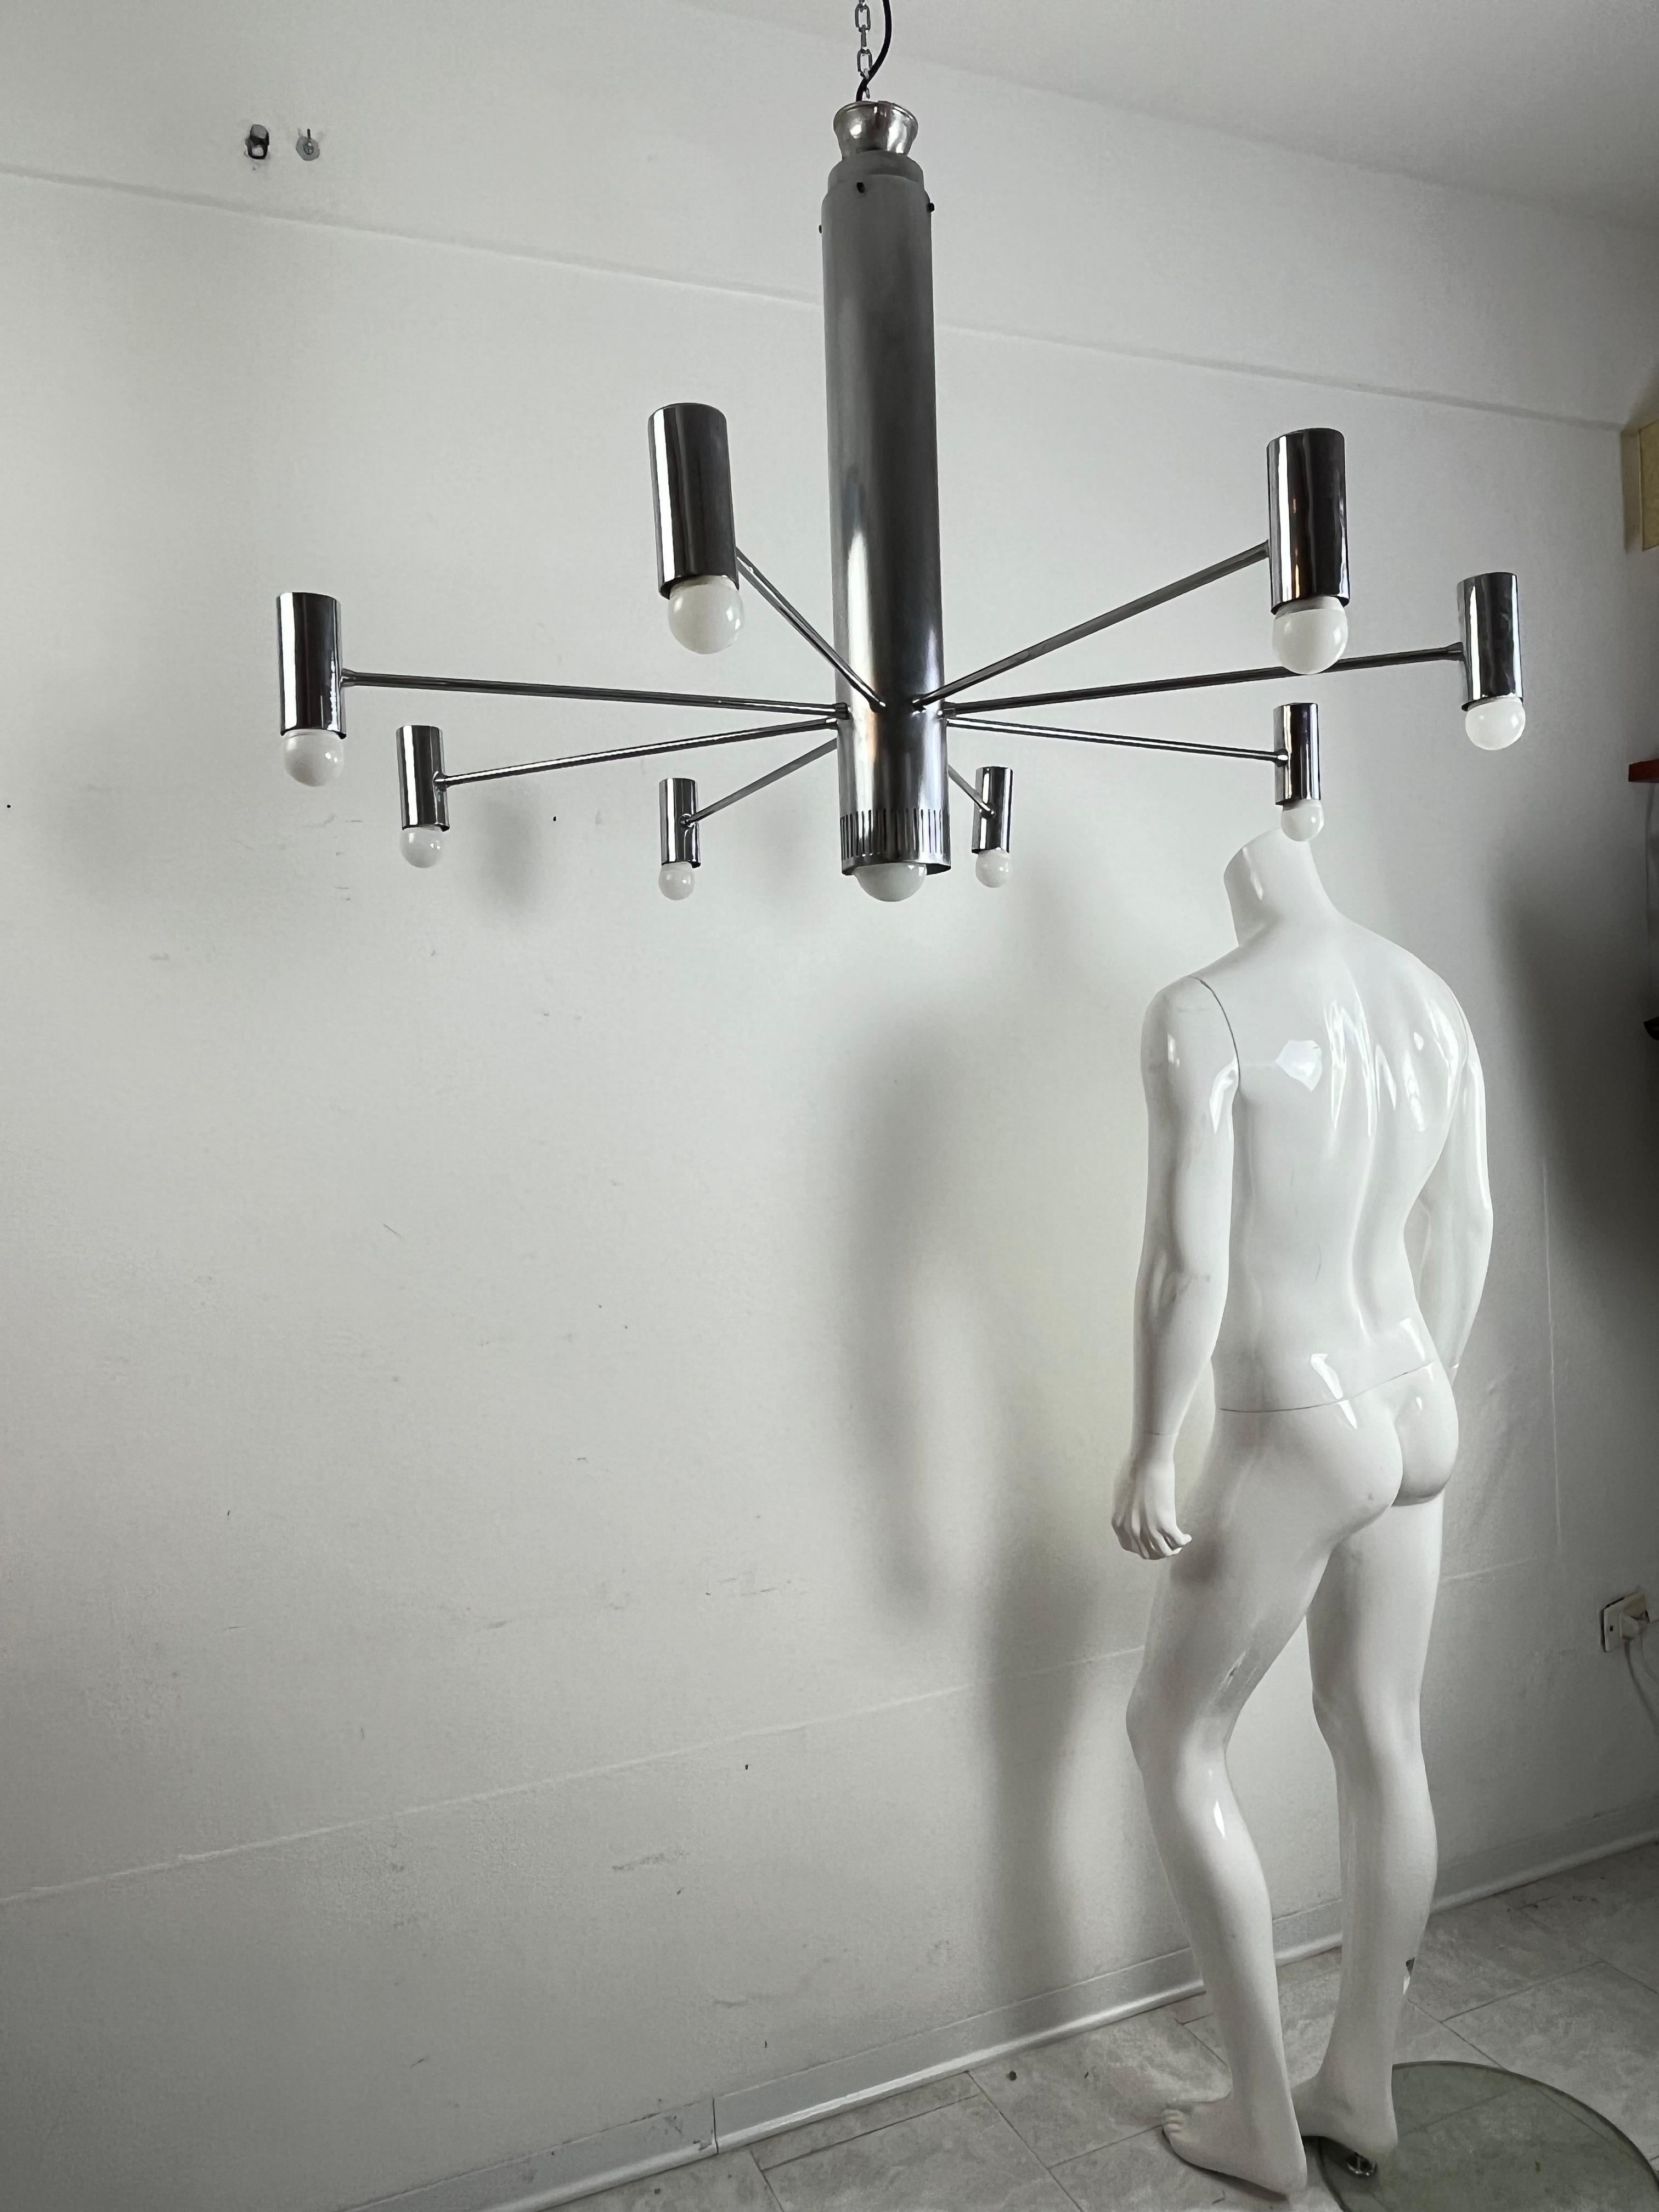 Minimalist 9-light steel chandelier attributed to Angelo Brotto, 1970s
Very large, it has a diameter of 104 cm.
One central E27 lamp and eight on the arms with E14 socket.
Intact and in good condition. Small signs of aging.
It will be shipped